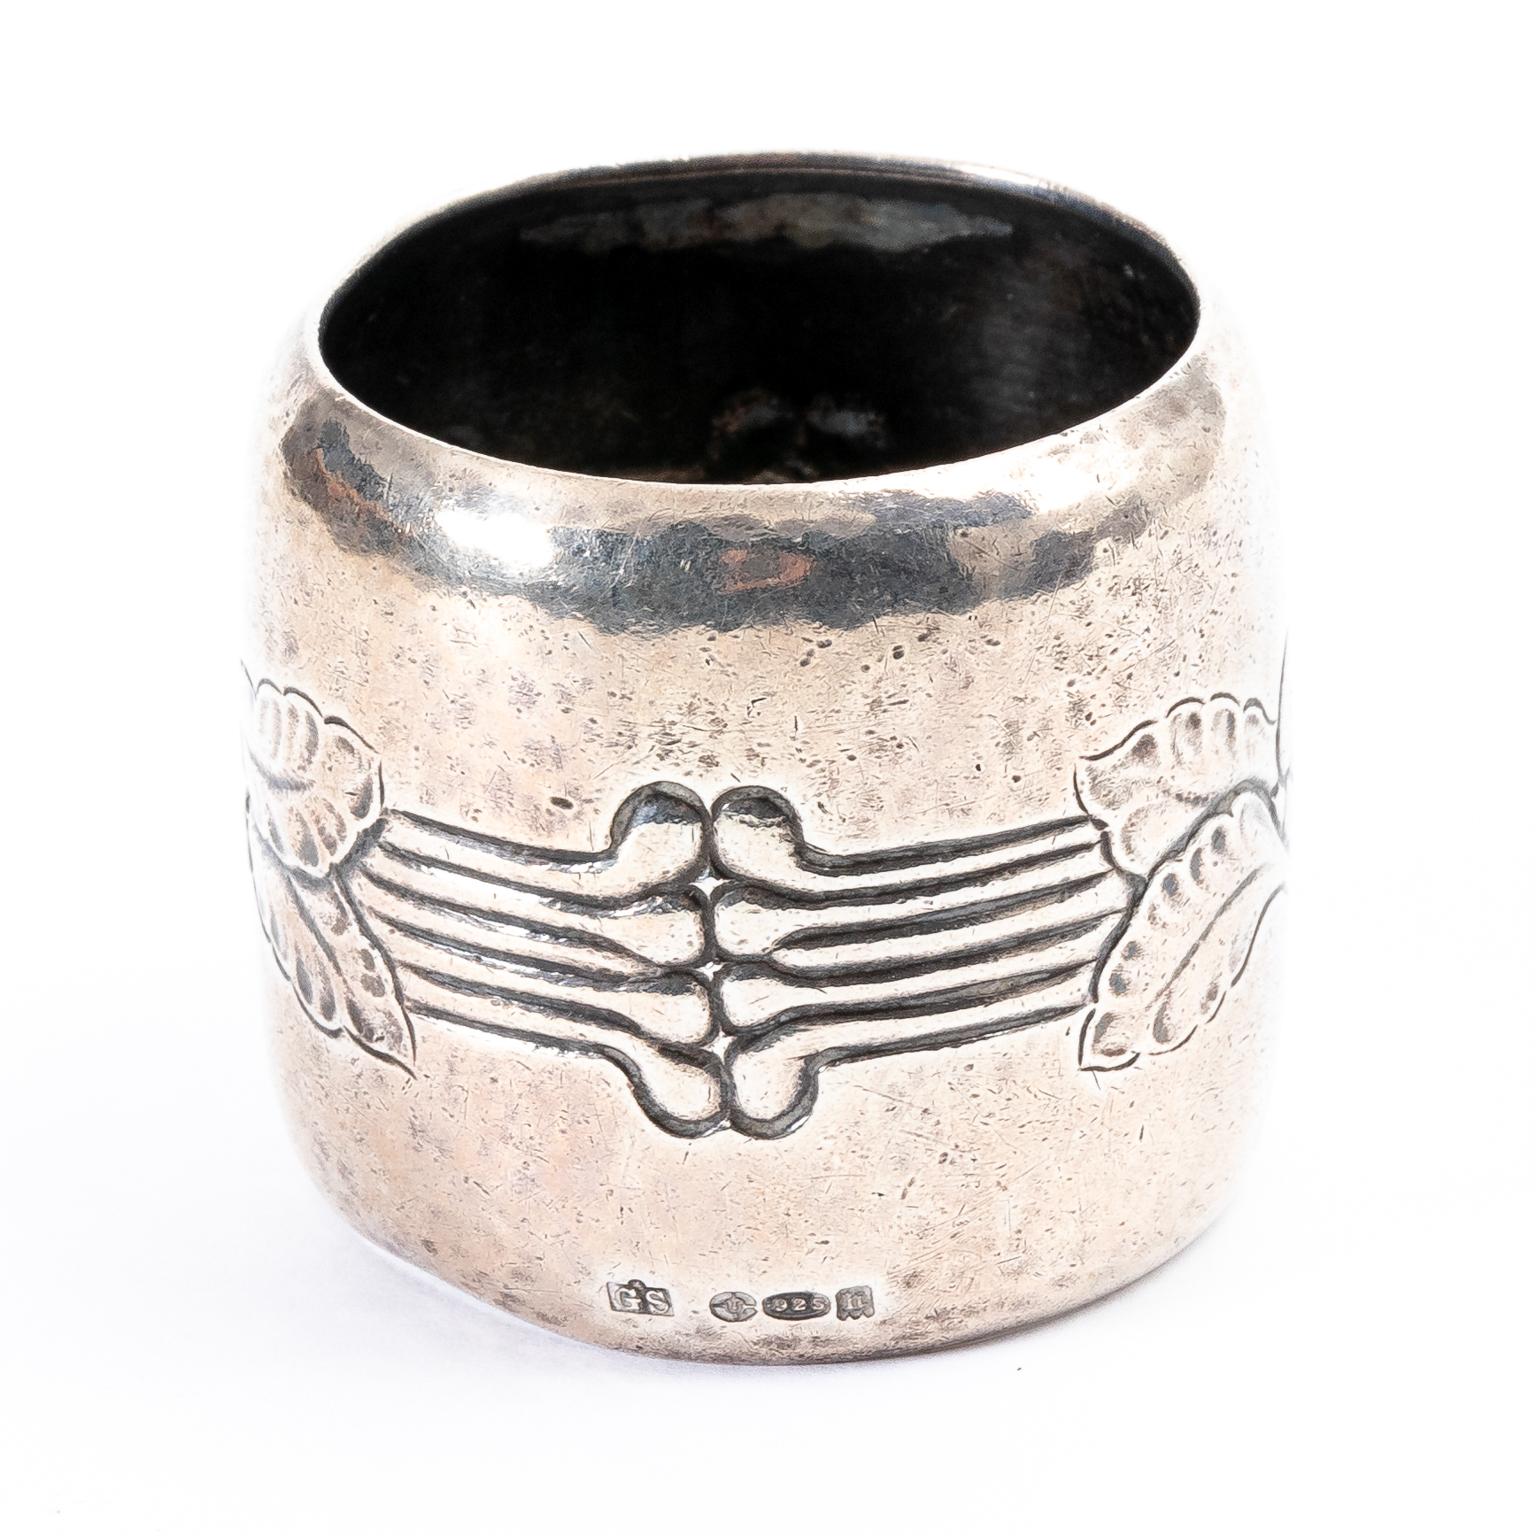 Sterling silver napkin ring designed and hammered by Georg Jensen with floral designs, circa 1920s. It was imported to England and made in Denmark. The piece features hallmark for early Jensen, 